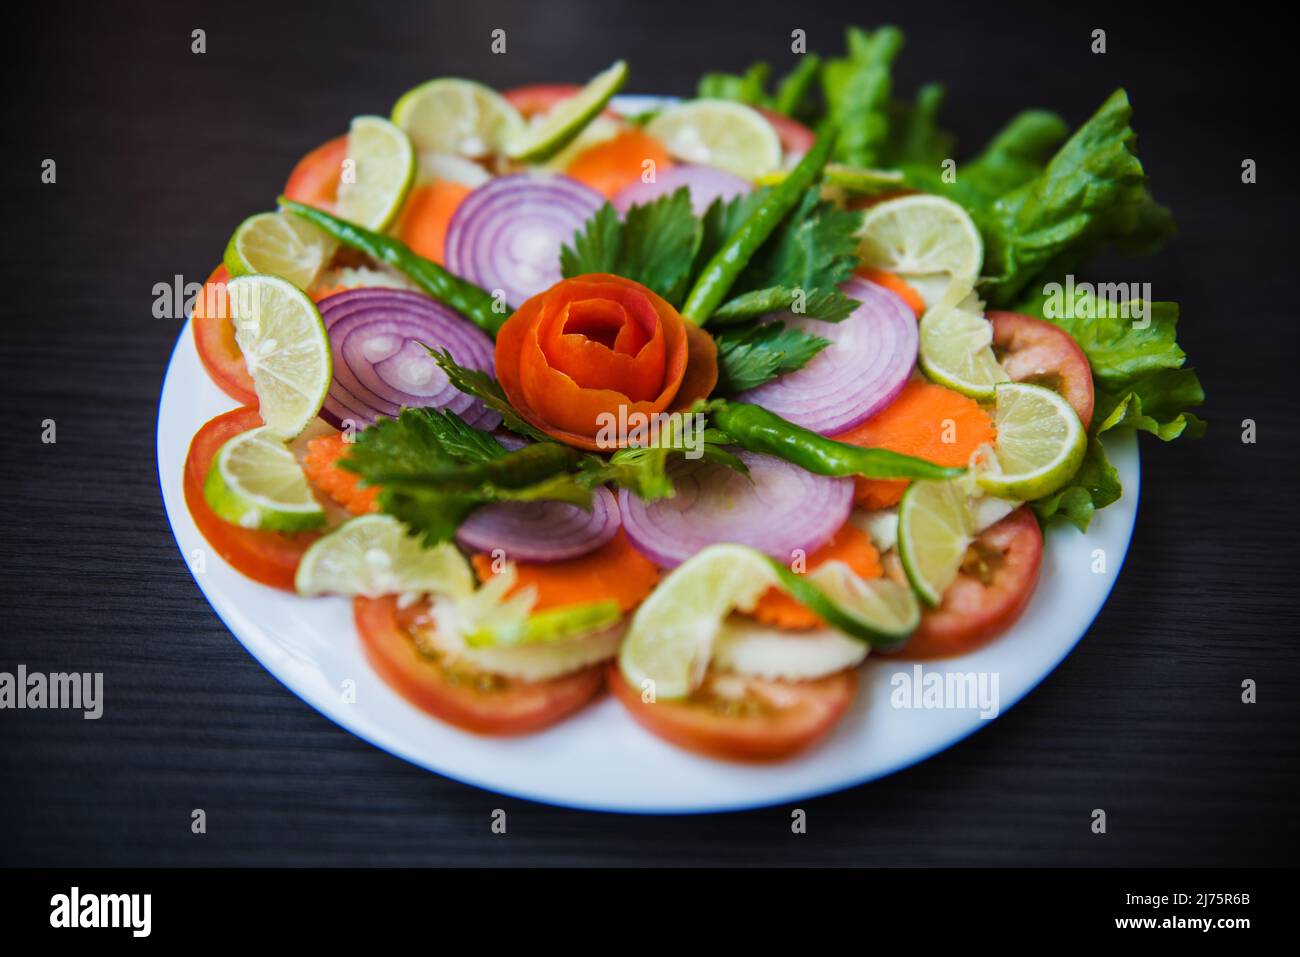 Mixed vegetable salad with tomatoes, red onions and limes Stock Photo